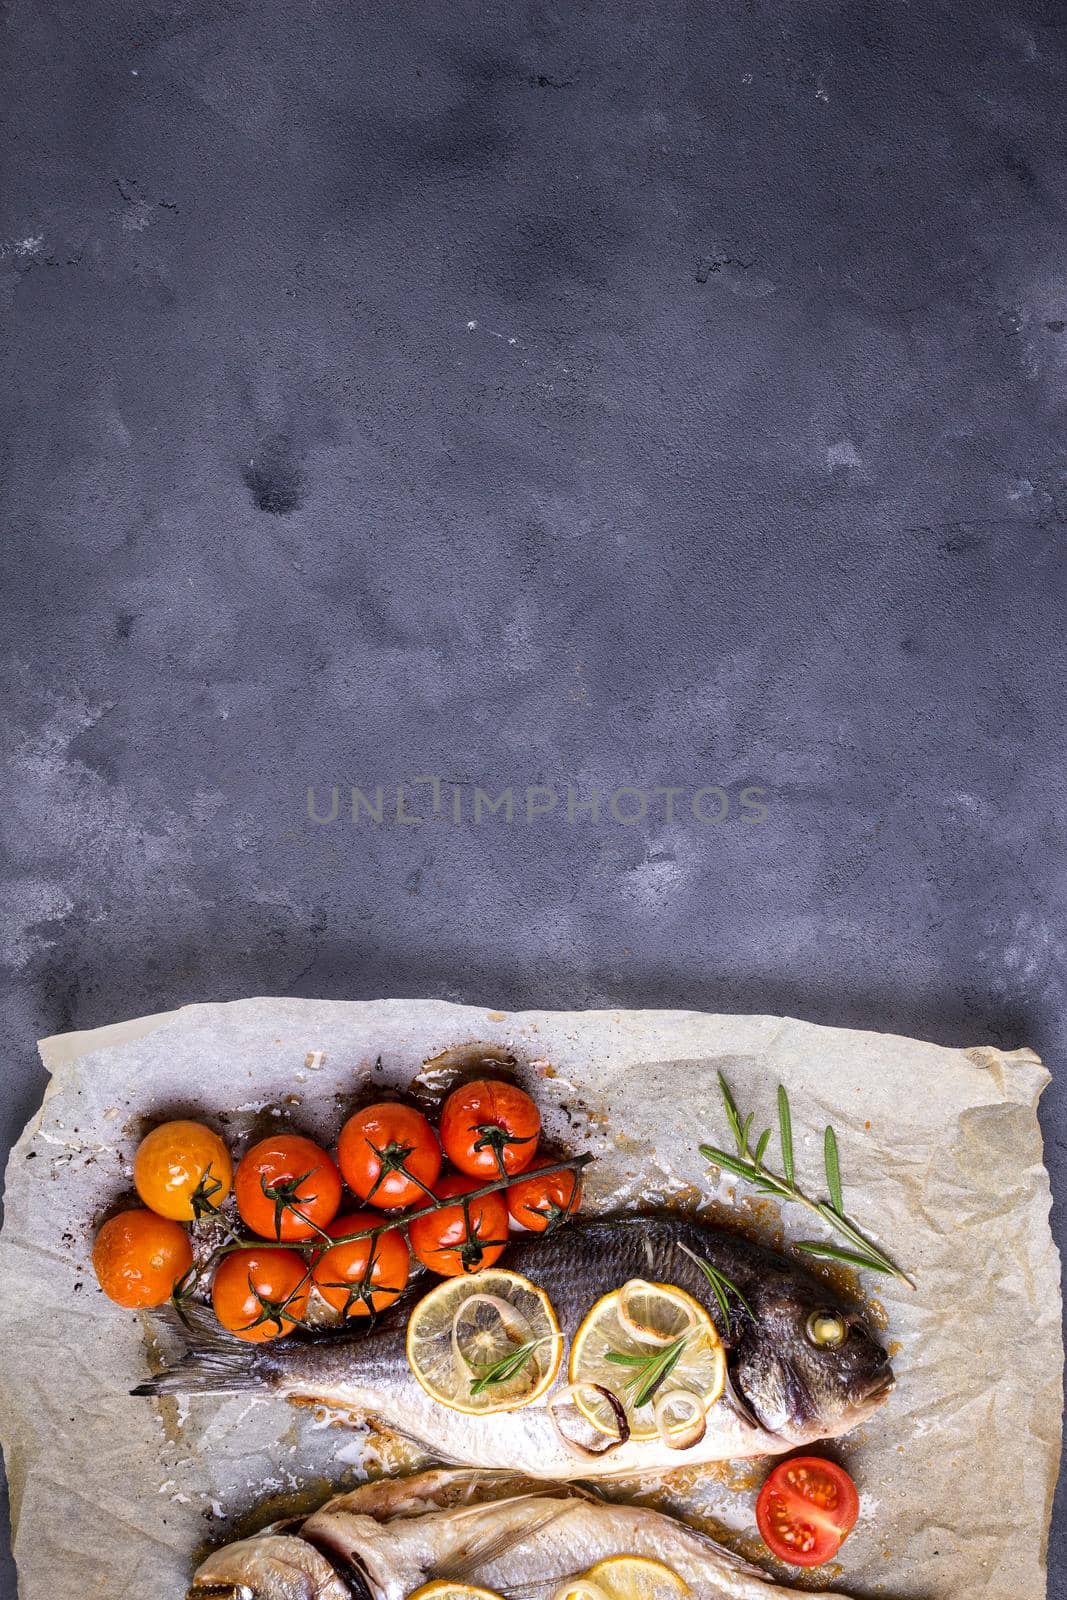 Tasty baked fish on dark rustic background. Baked sea bream with lemon, onion, herbs, tomatoes, spices. Space for text. Grilled delicious fish background. Diet and healthy food concept. Top view